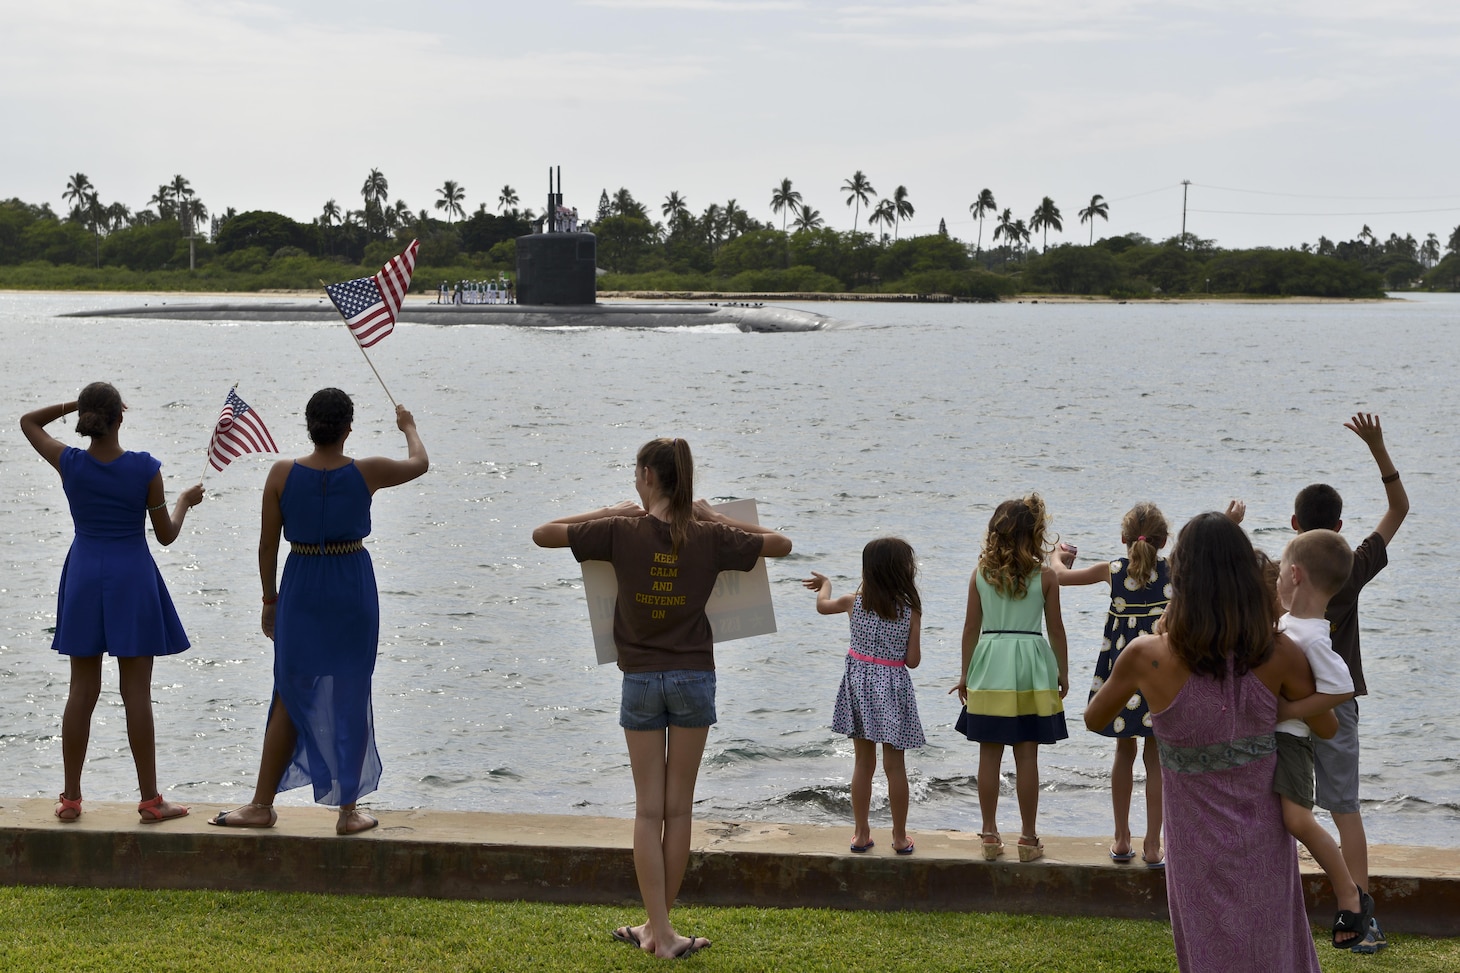 160205-N-LY160-016 PEARL HARBOR (Feb. 5, 2016) Family and friends cheer the return of the crew aboard the Los Angeles-class fast-attack submarine USS Cheyenne (SSN 773). USS Cheyenne returned to Pearl Harbor after completing a successful 5-month deployment to the western Pacific Ocean. (U.S. Navy photo by Mass Communication Specialist 2nd Class Michael H. Lee/Released)